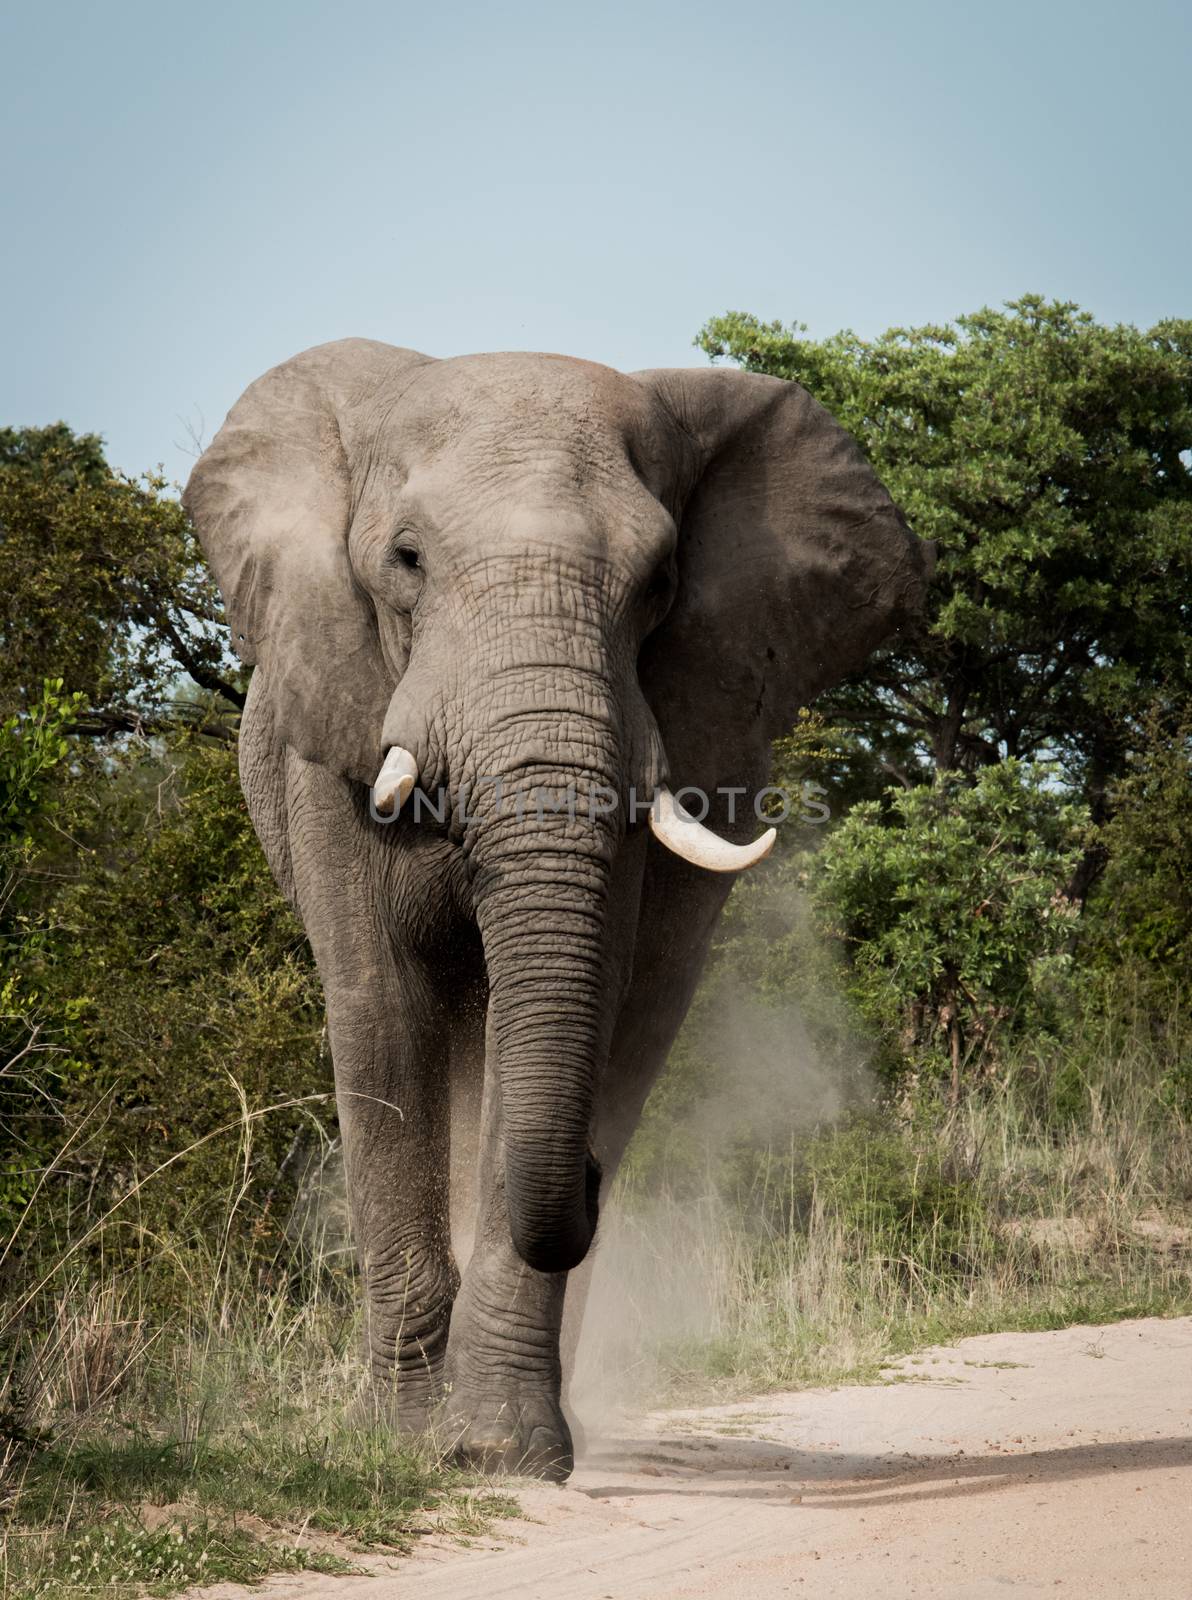 African elephant walking towards the camera in the Kruger National Park, South Africa.